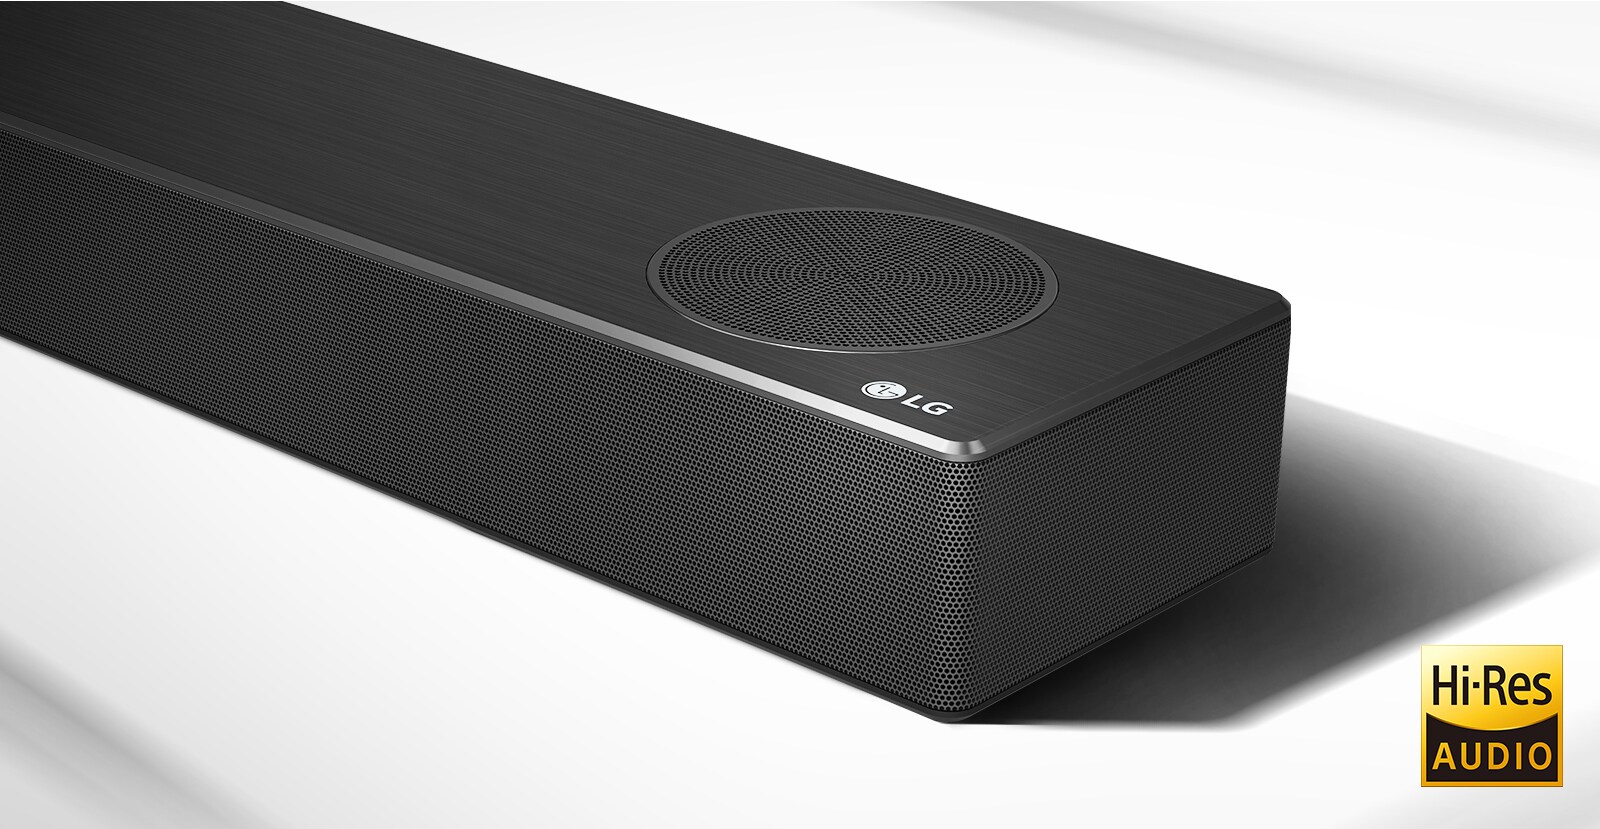 Close-up right side of LG Soundbar with LG logo shown on the bottom right corner. Hi-Res logo is shown below the product.